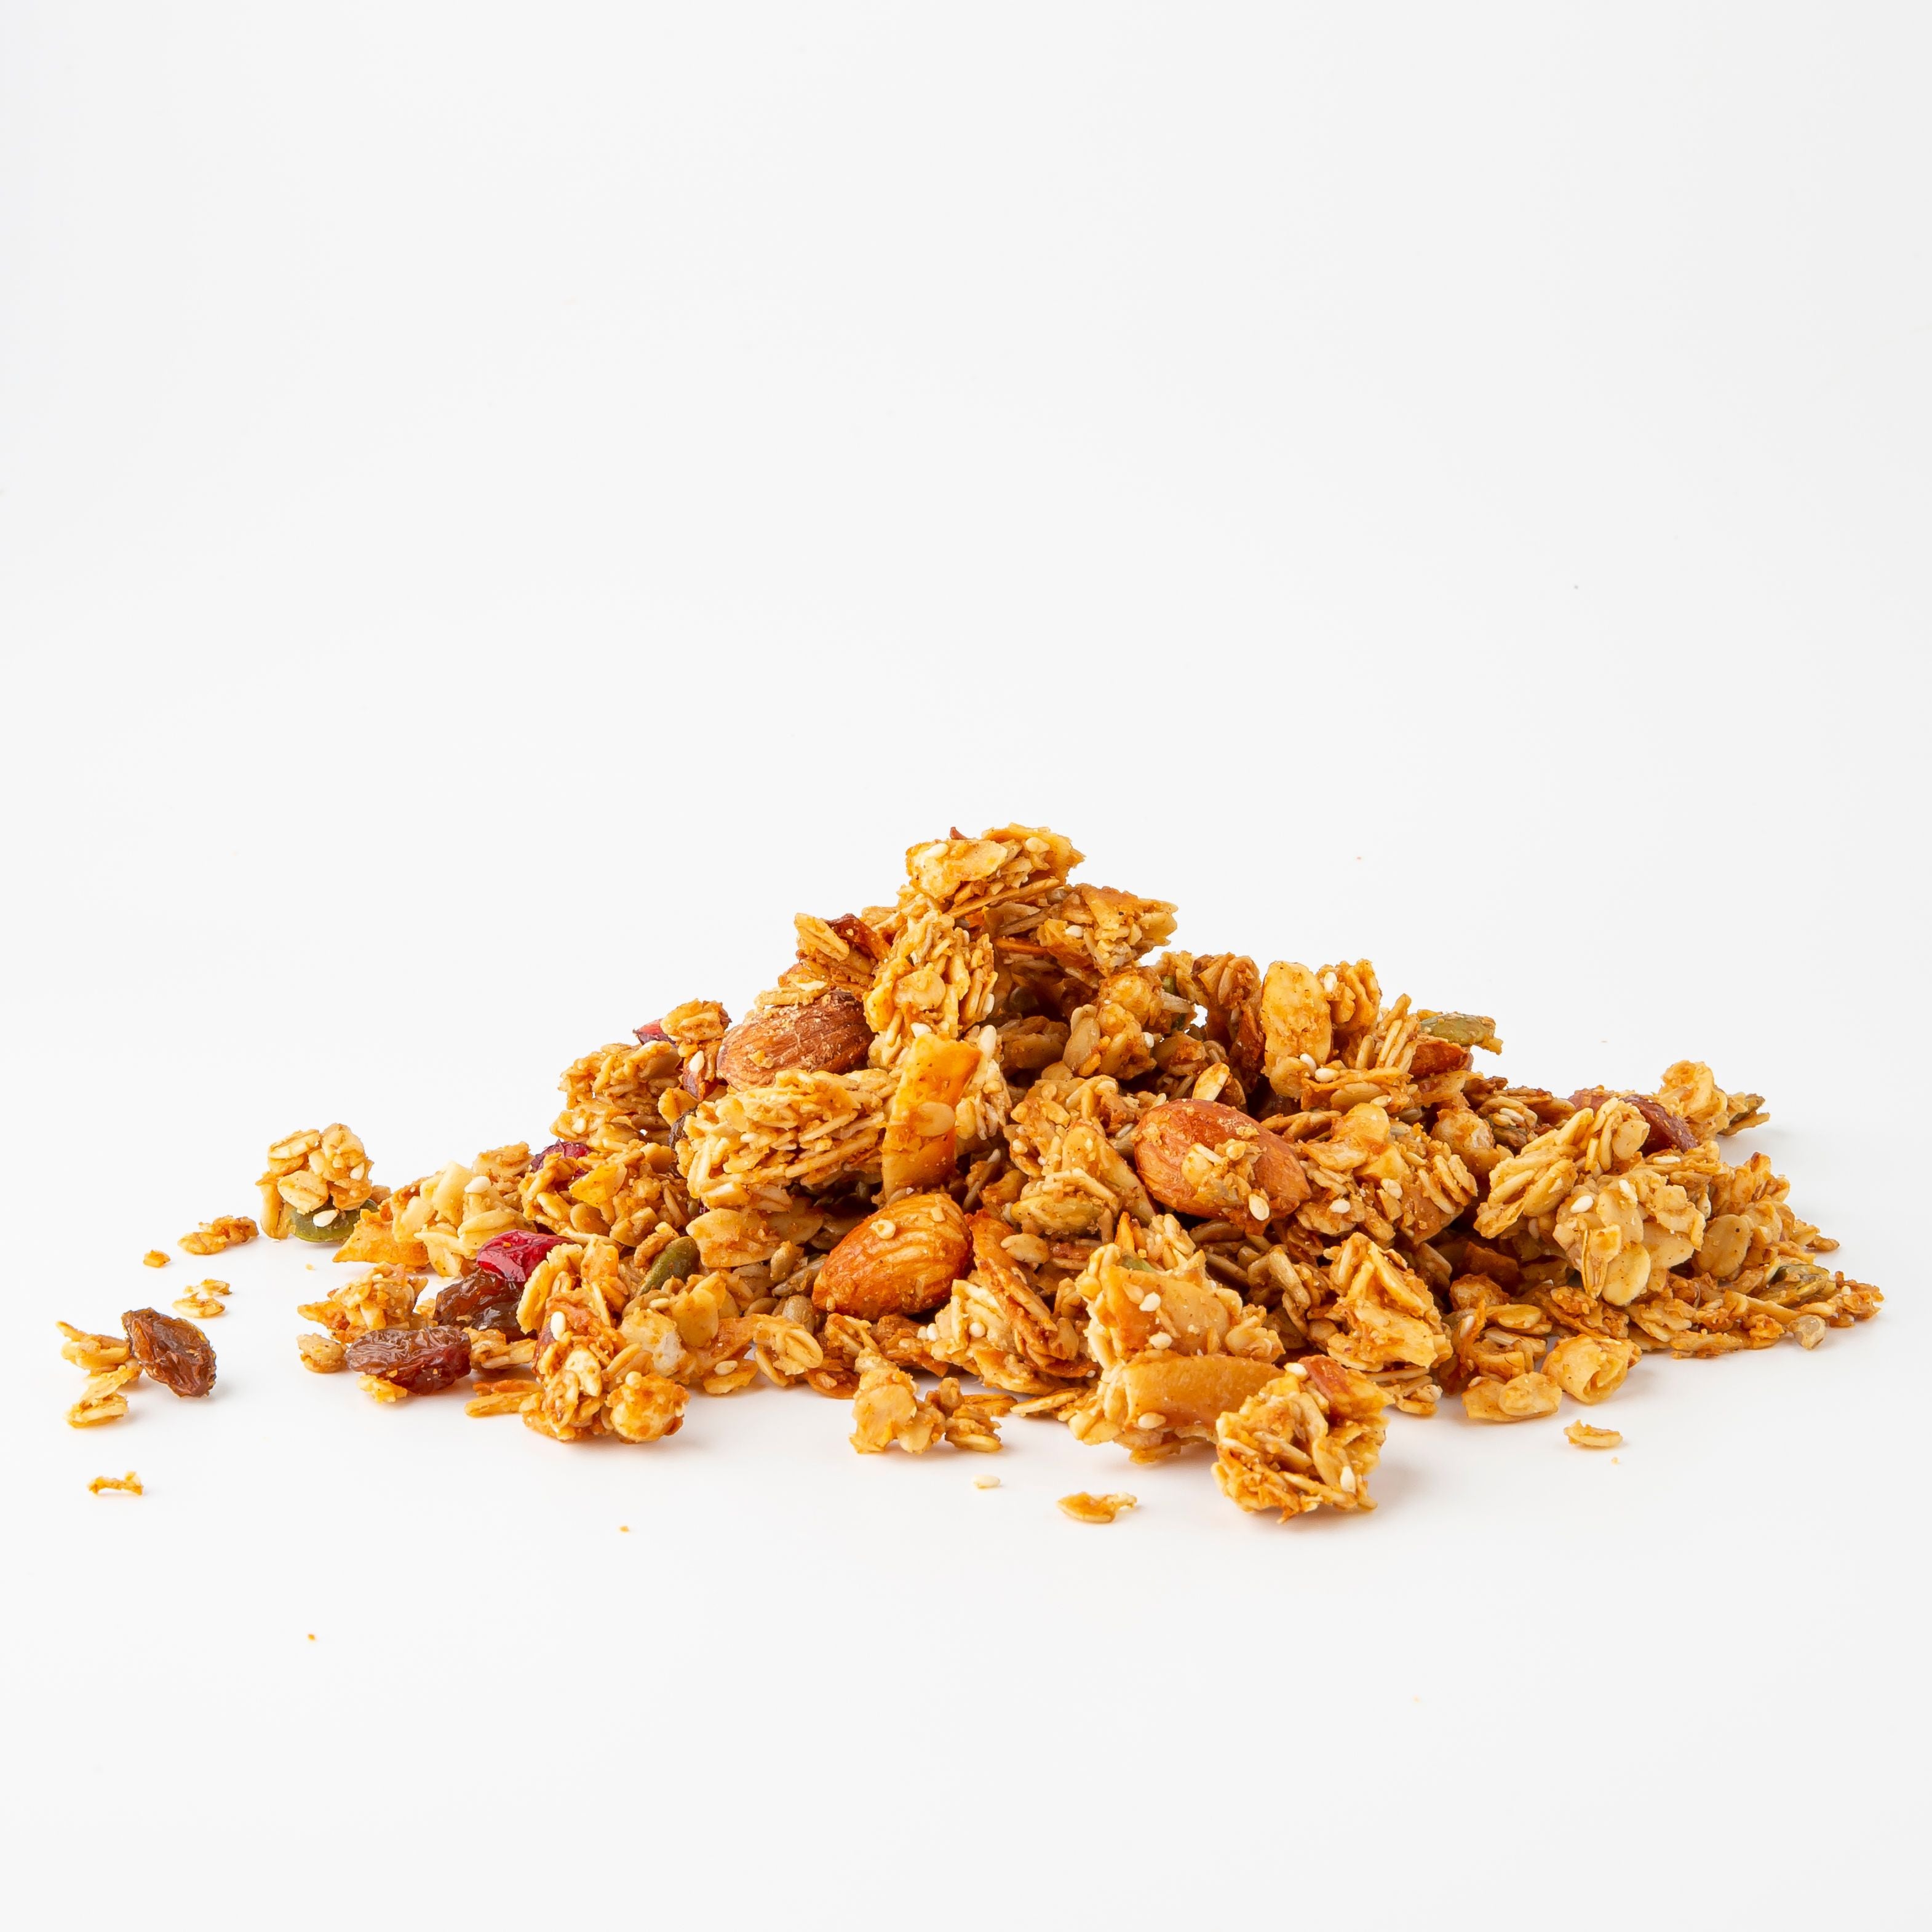 A heap of Fruit and Nut Granola (Cereals) - Naked Foods